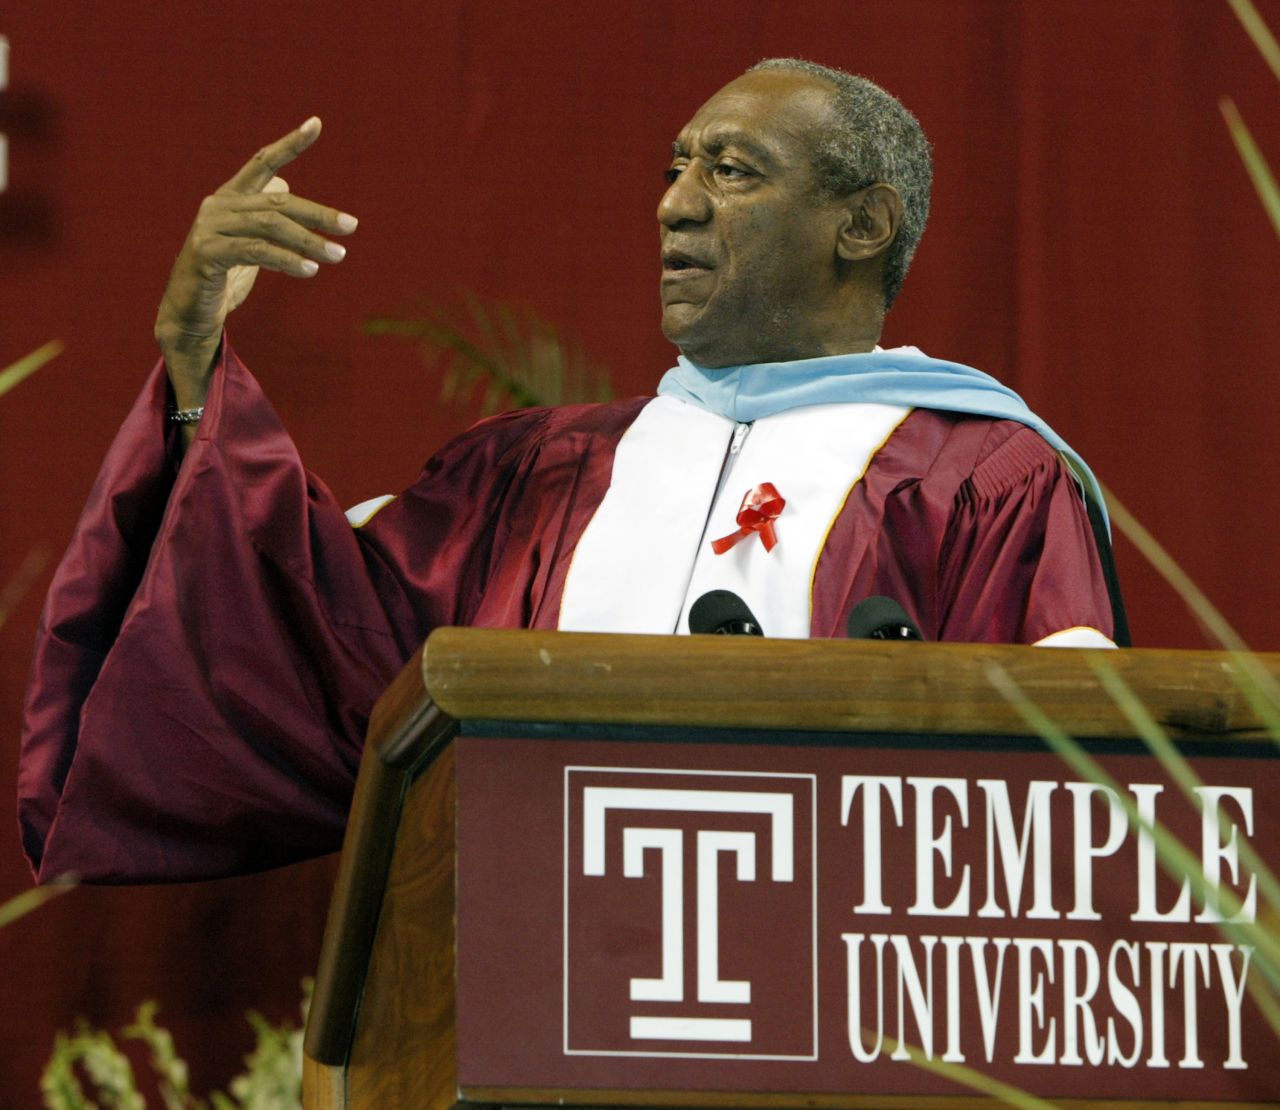 Comedian Bill Cosby will address graduates at Marquette University in Milwaukee, Wisconsin, on May 19 and the University of Baltimore on May 21. He also spoke in 2003 at the graduation of Temple University in Philadelphia, where he studied.